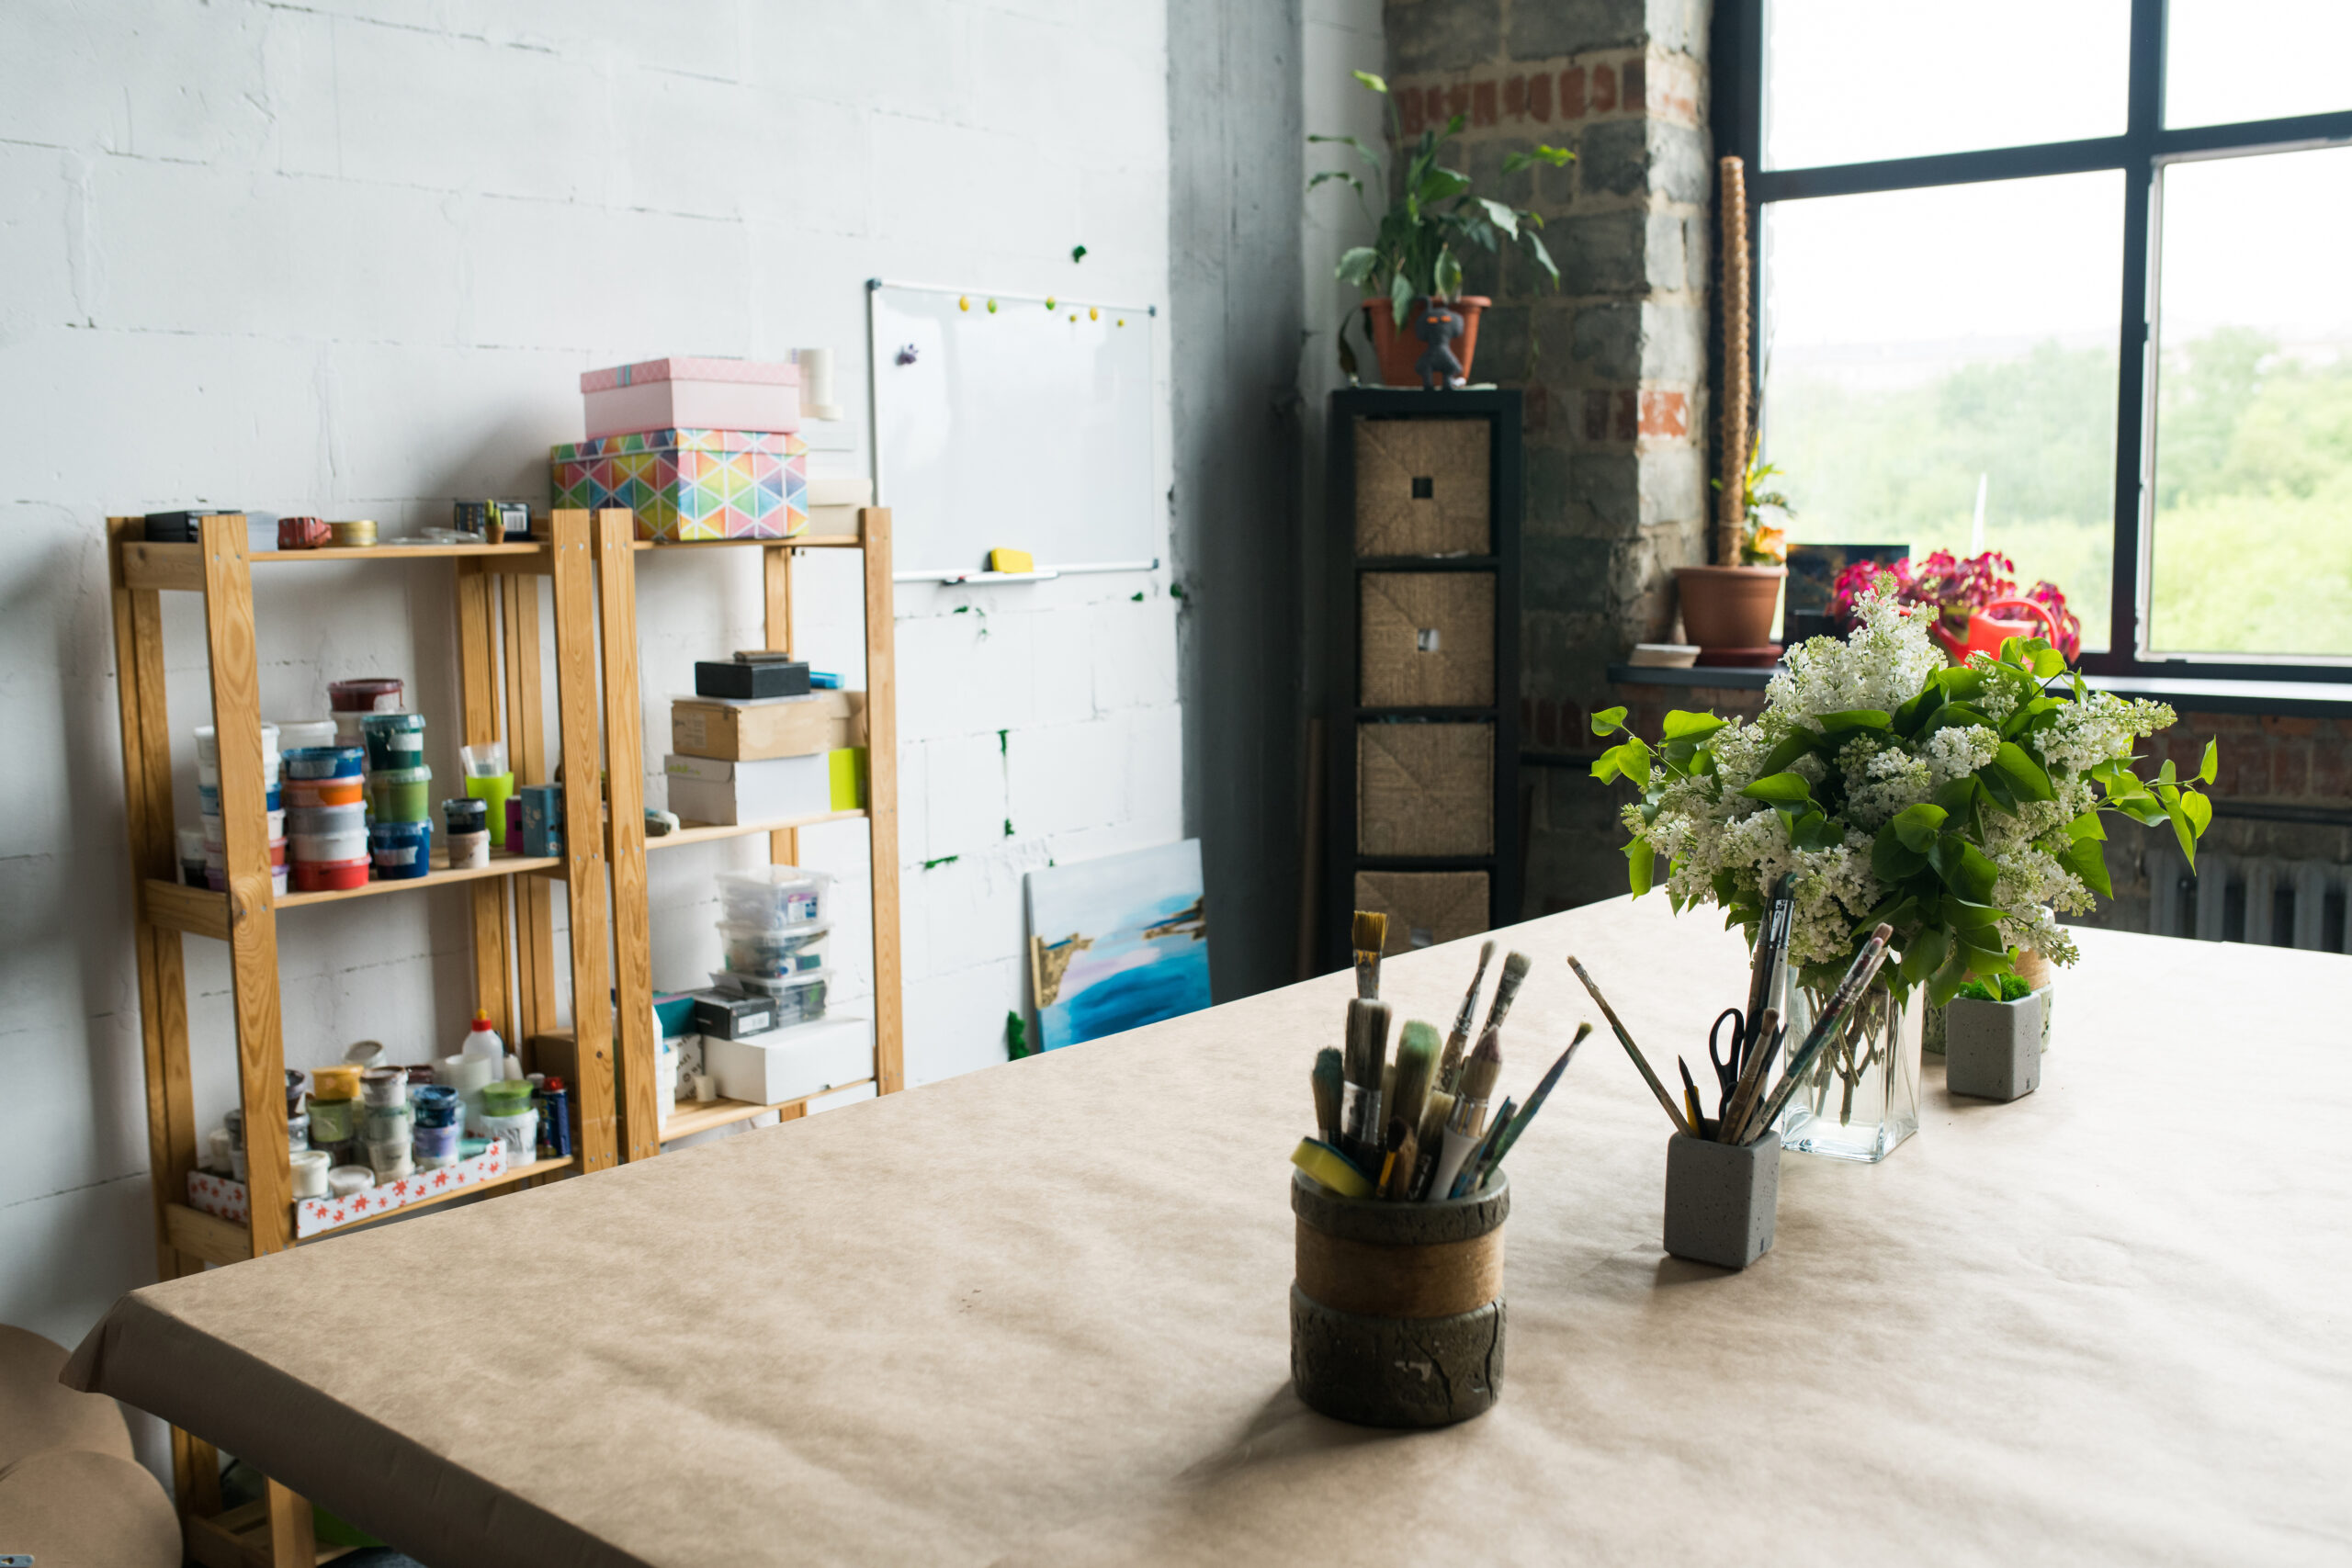 Photo of a clean and organized creative space with flowers on the table and a large window.